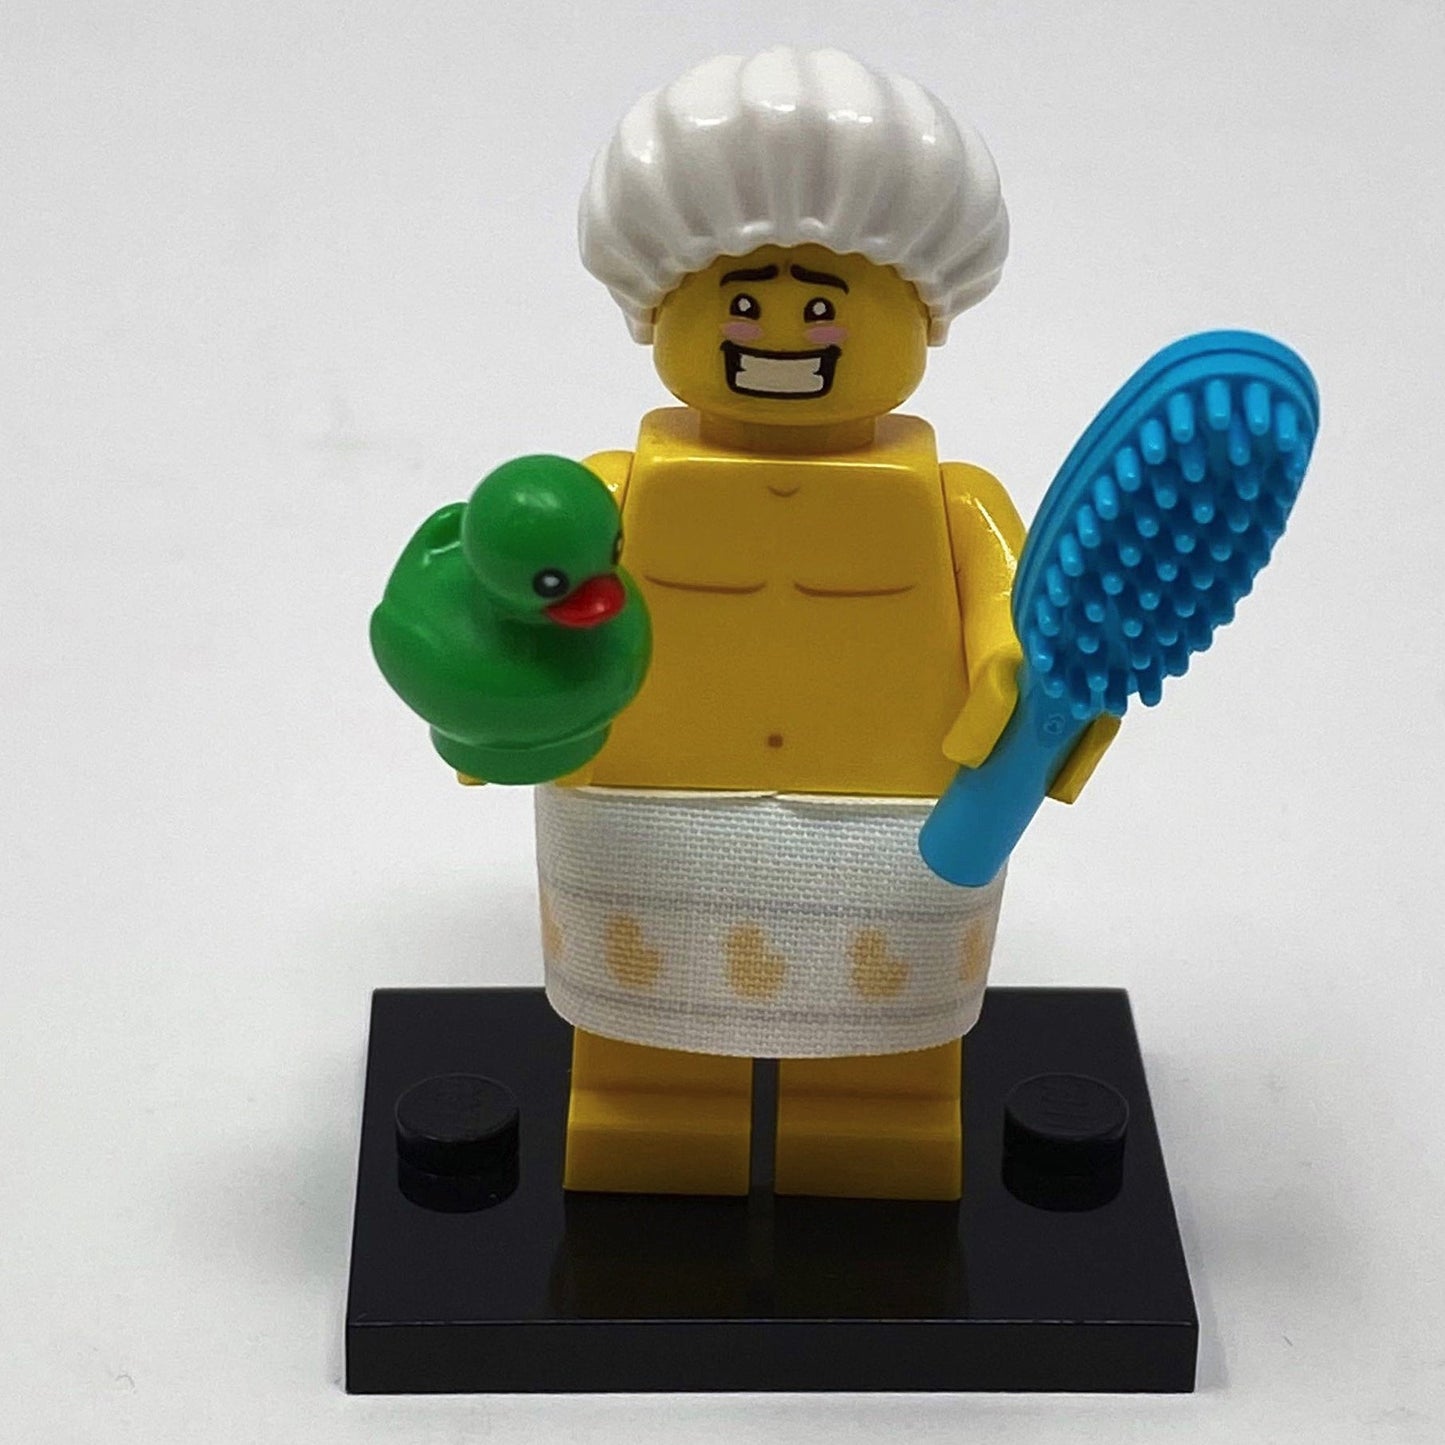 S19 Shower Guy - Series 19 Minifigure (col342)